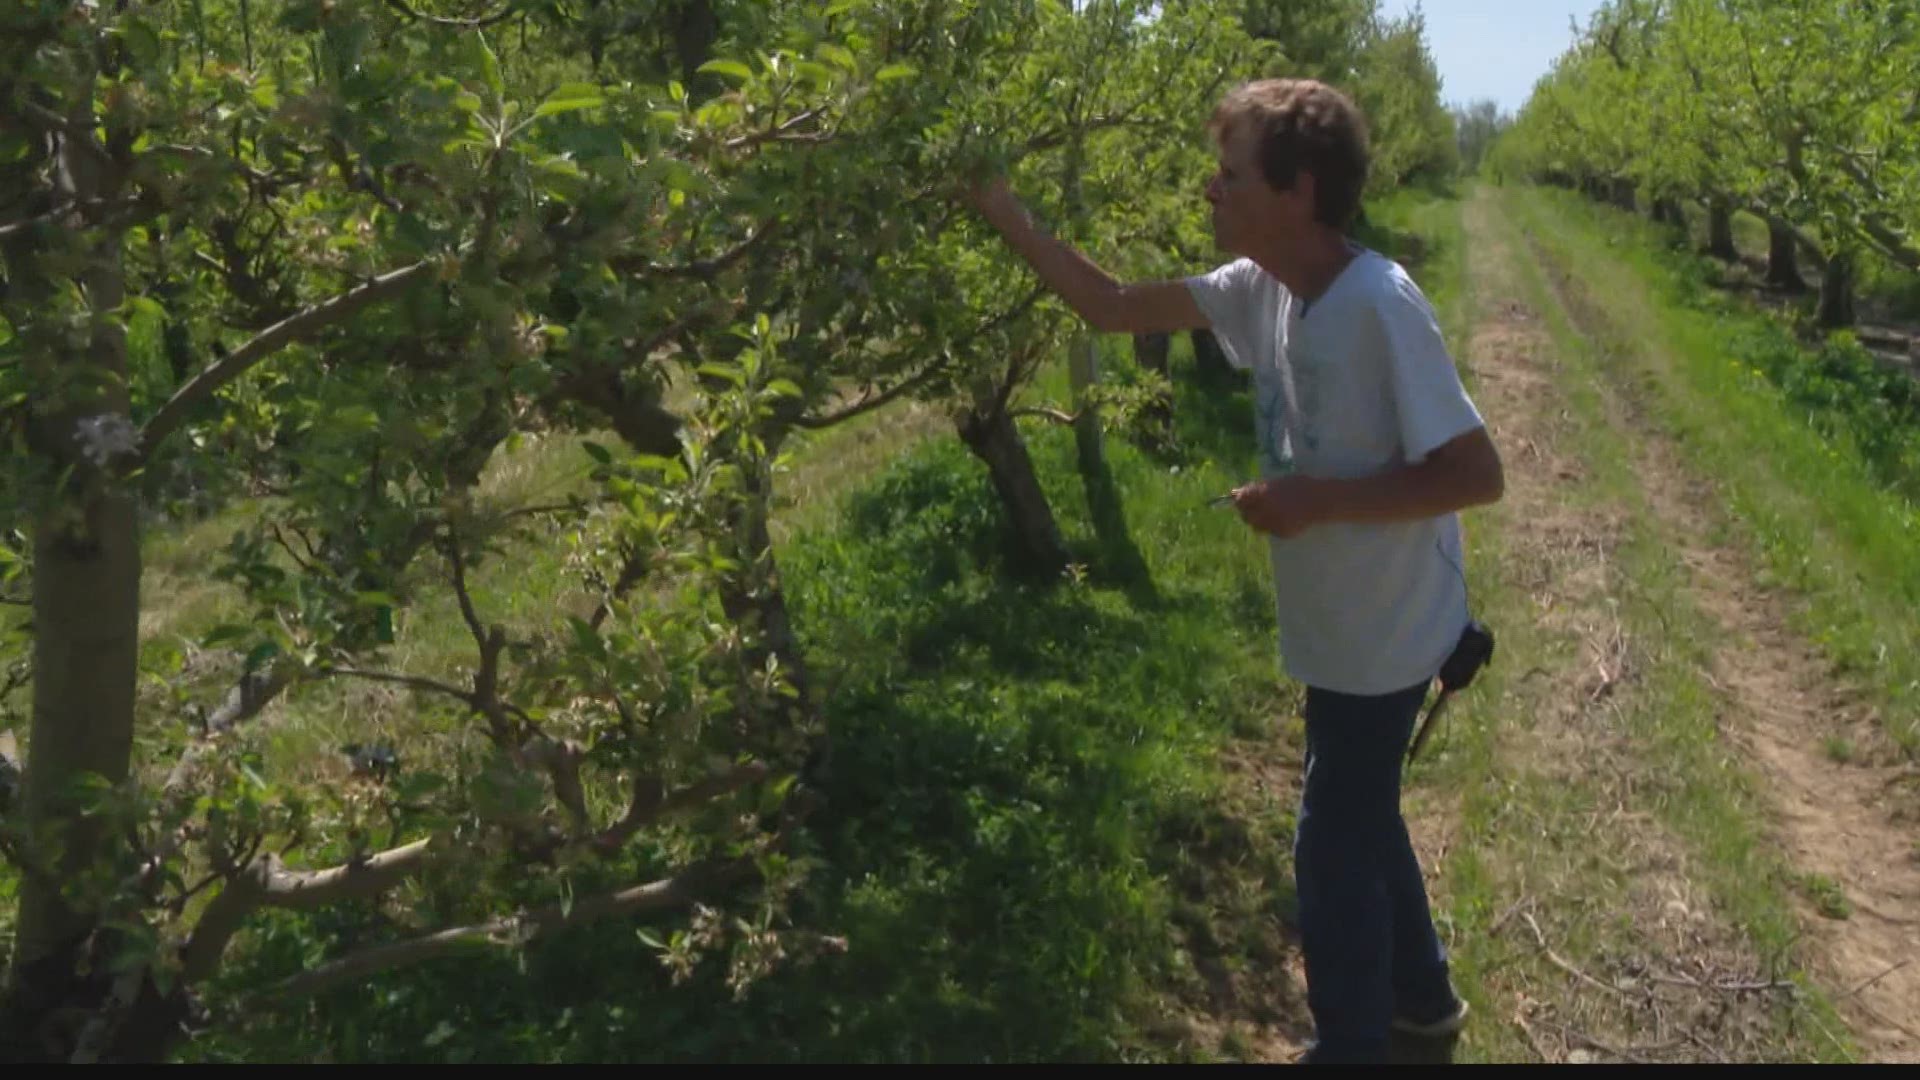 The snow and cold wiped out 70 percent of one Indiana orchard's apple crop.